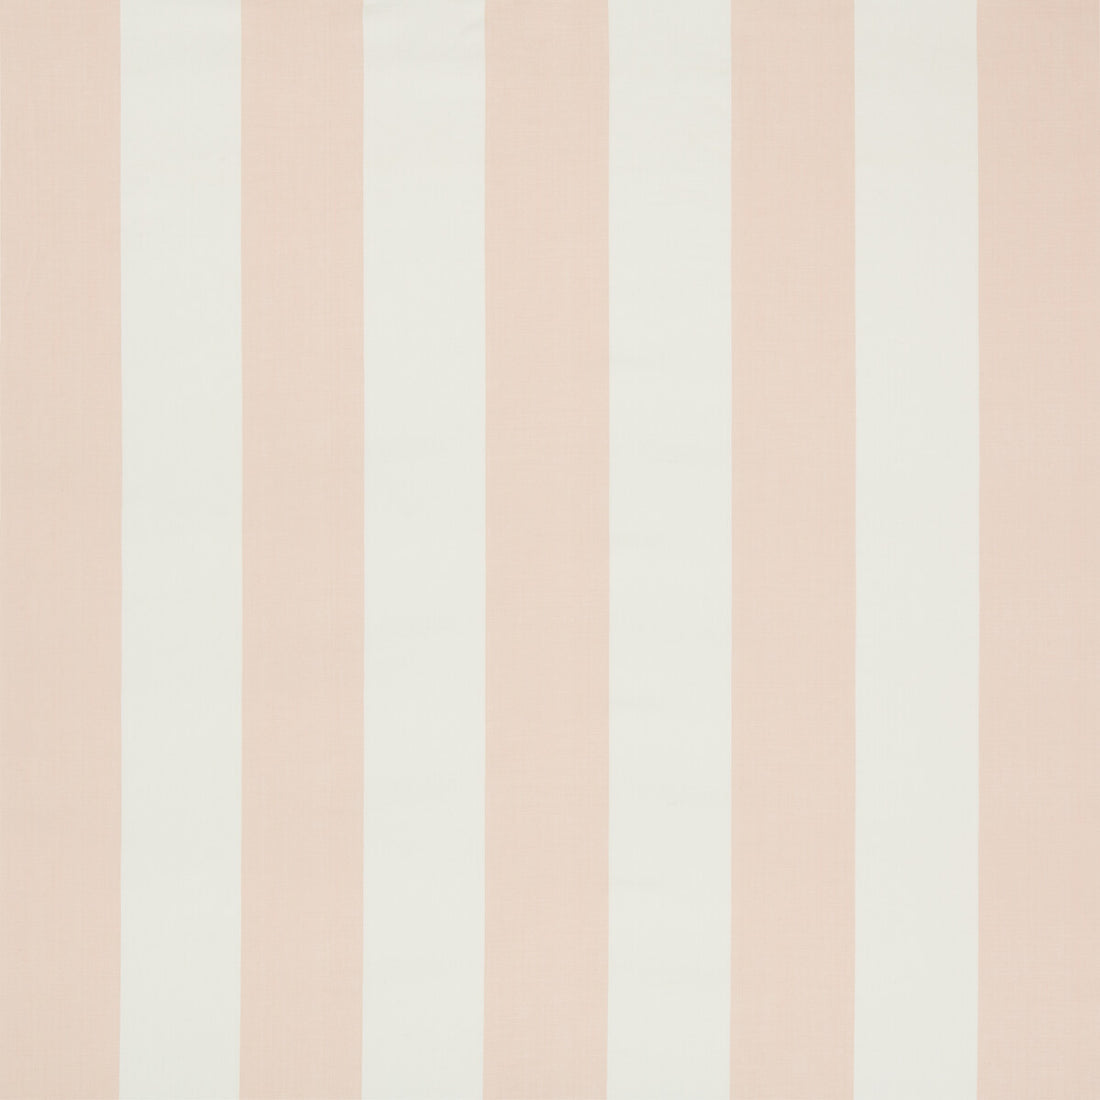 St Croix Stripe fabric in pink color - pattern 2018145.17.0 - by Lee Jofa in the Suzanne Kasler The Riviera collection